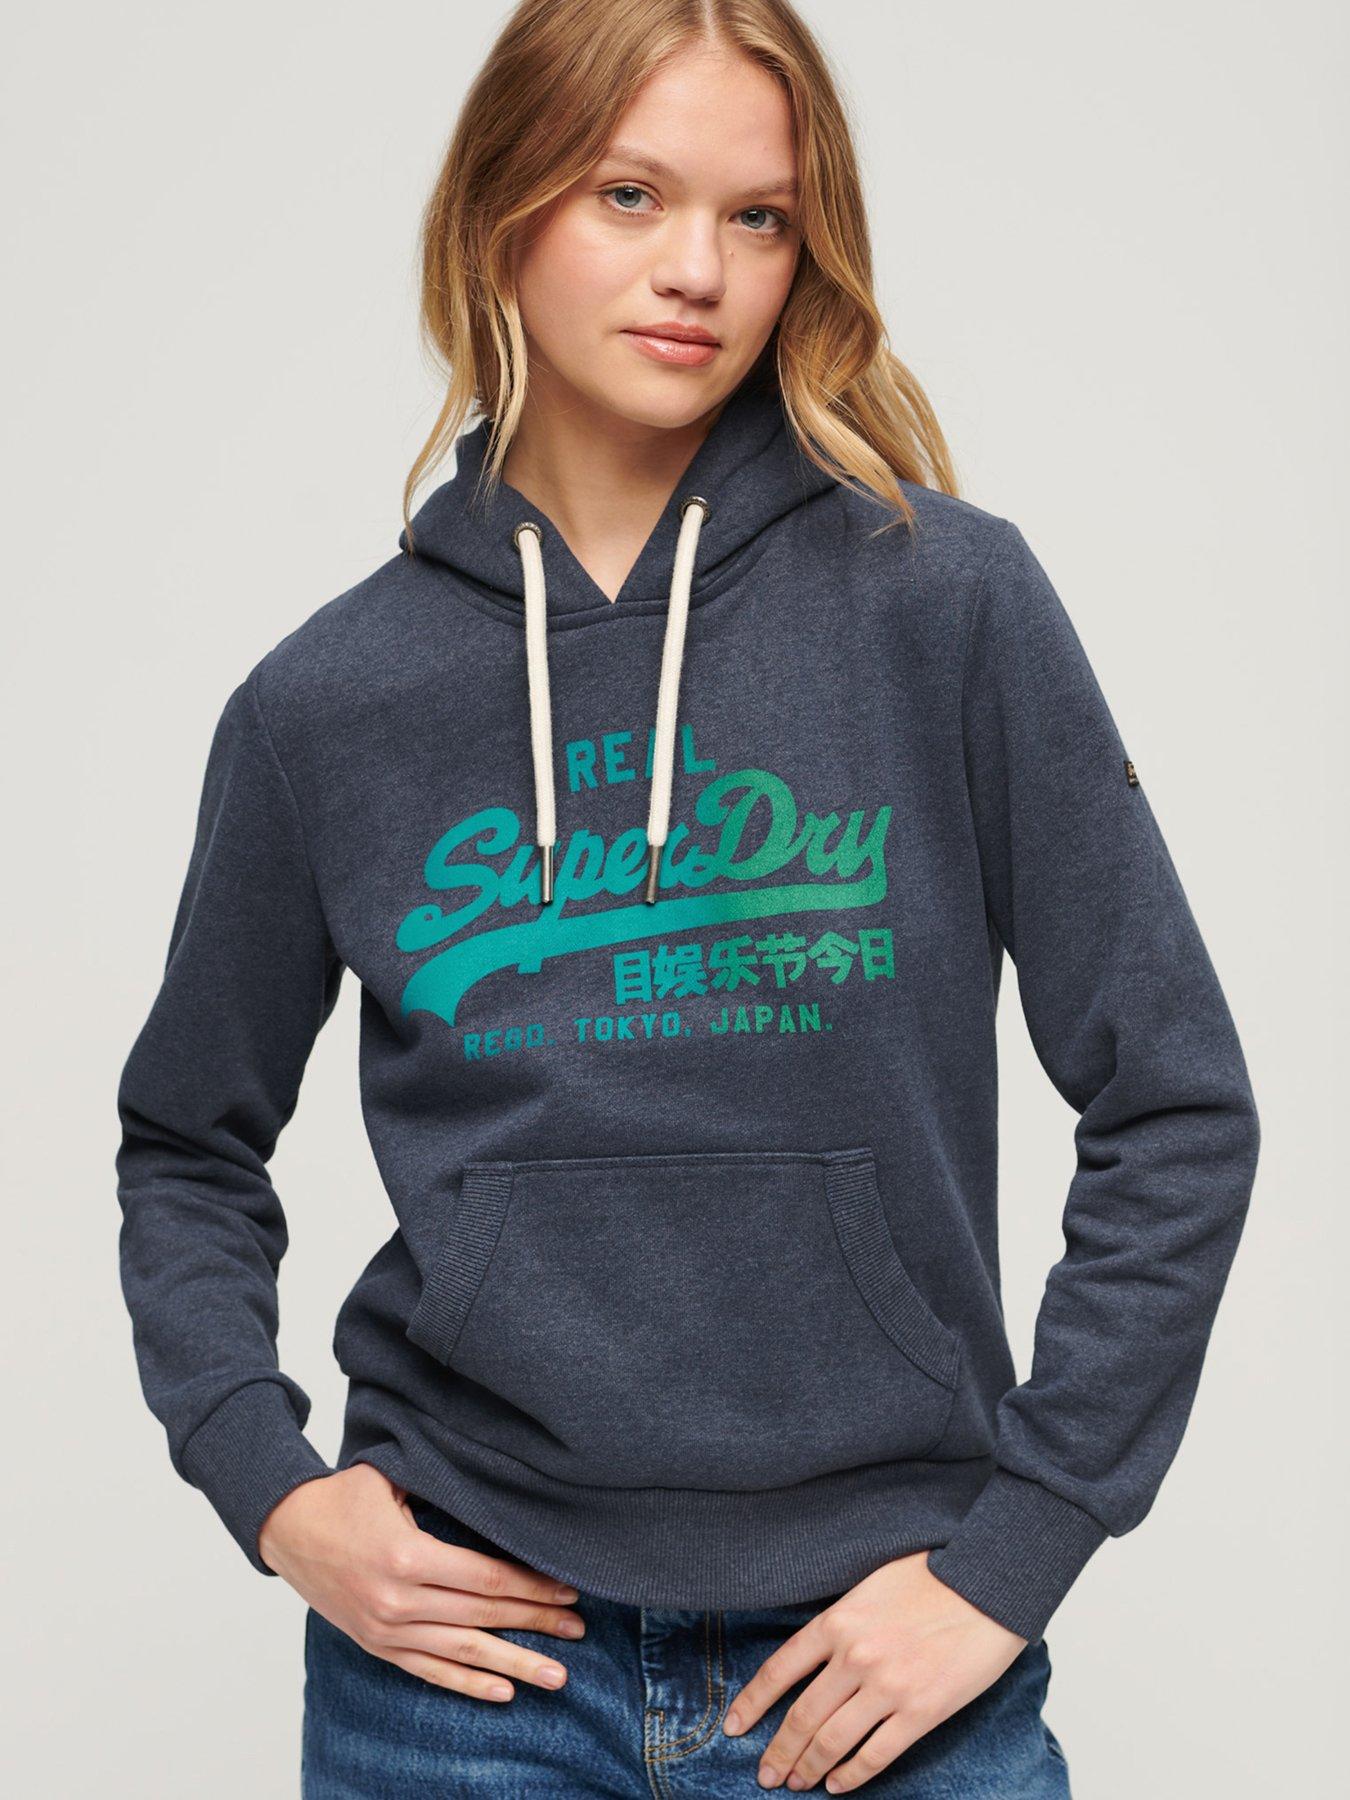 Superdry Womenswear, Superdry Clothing